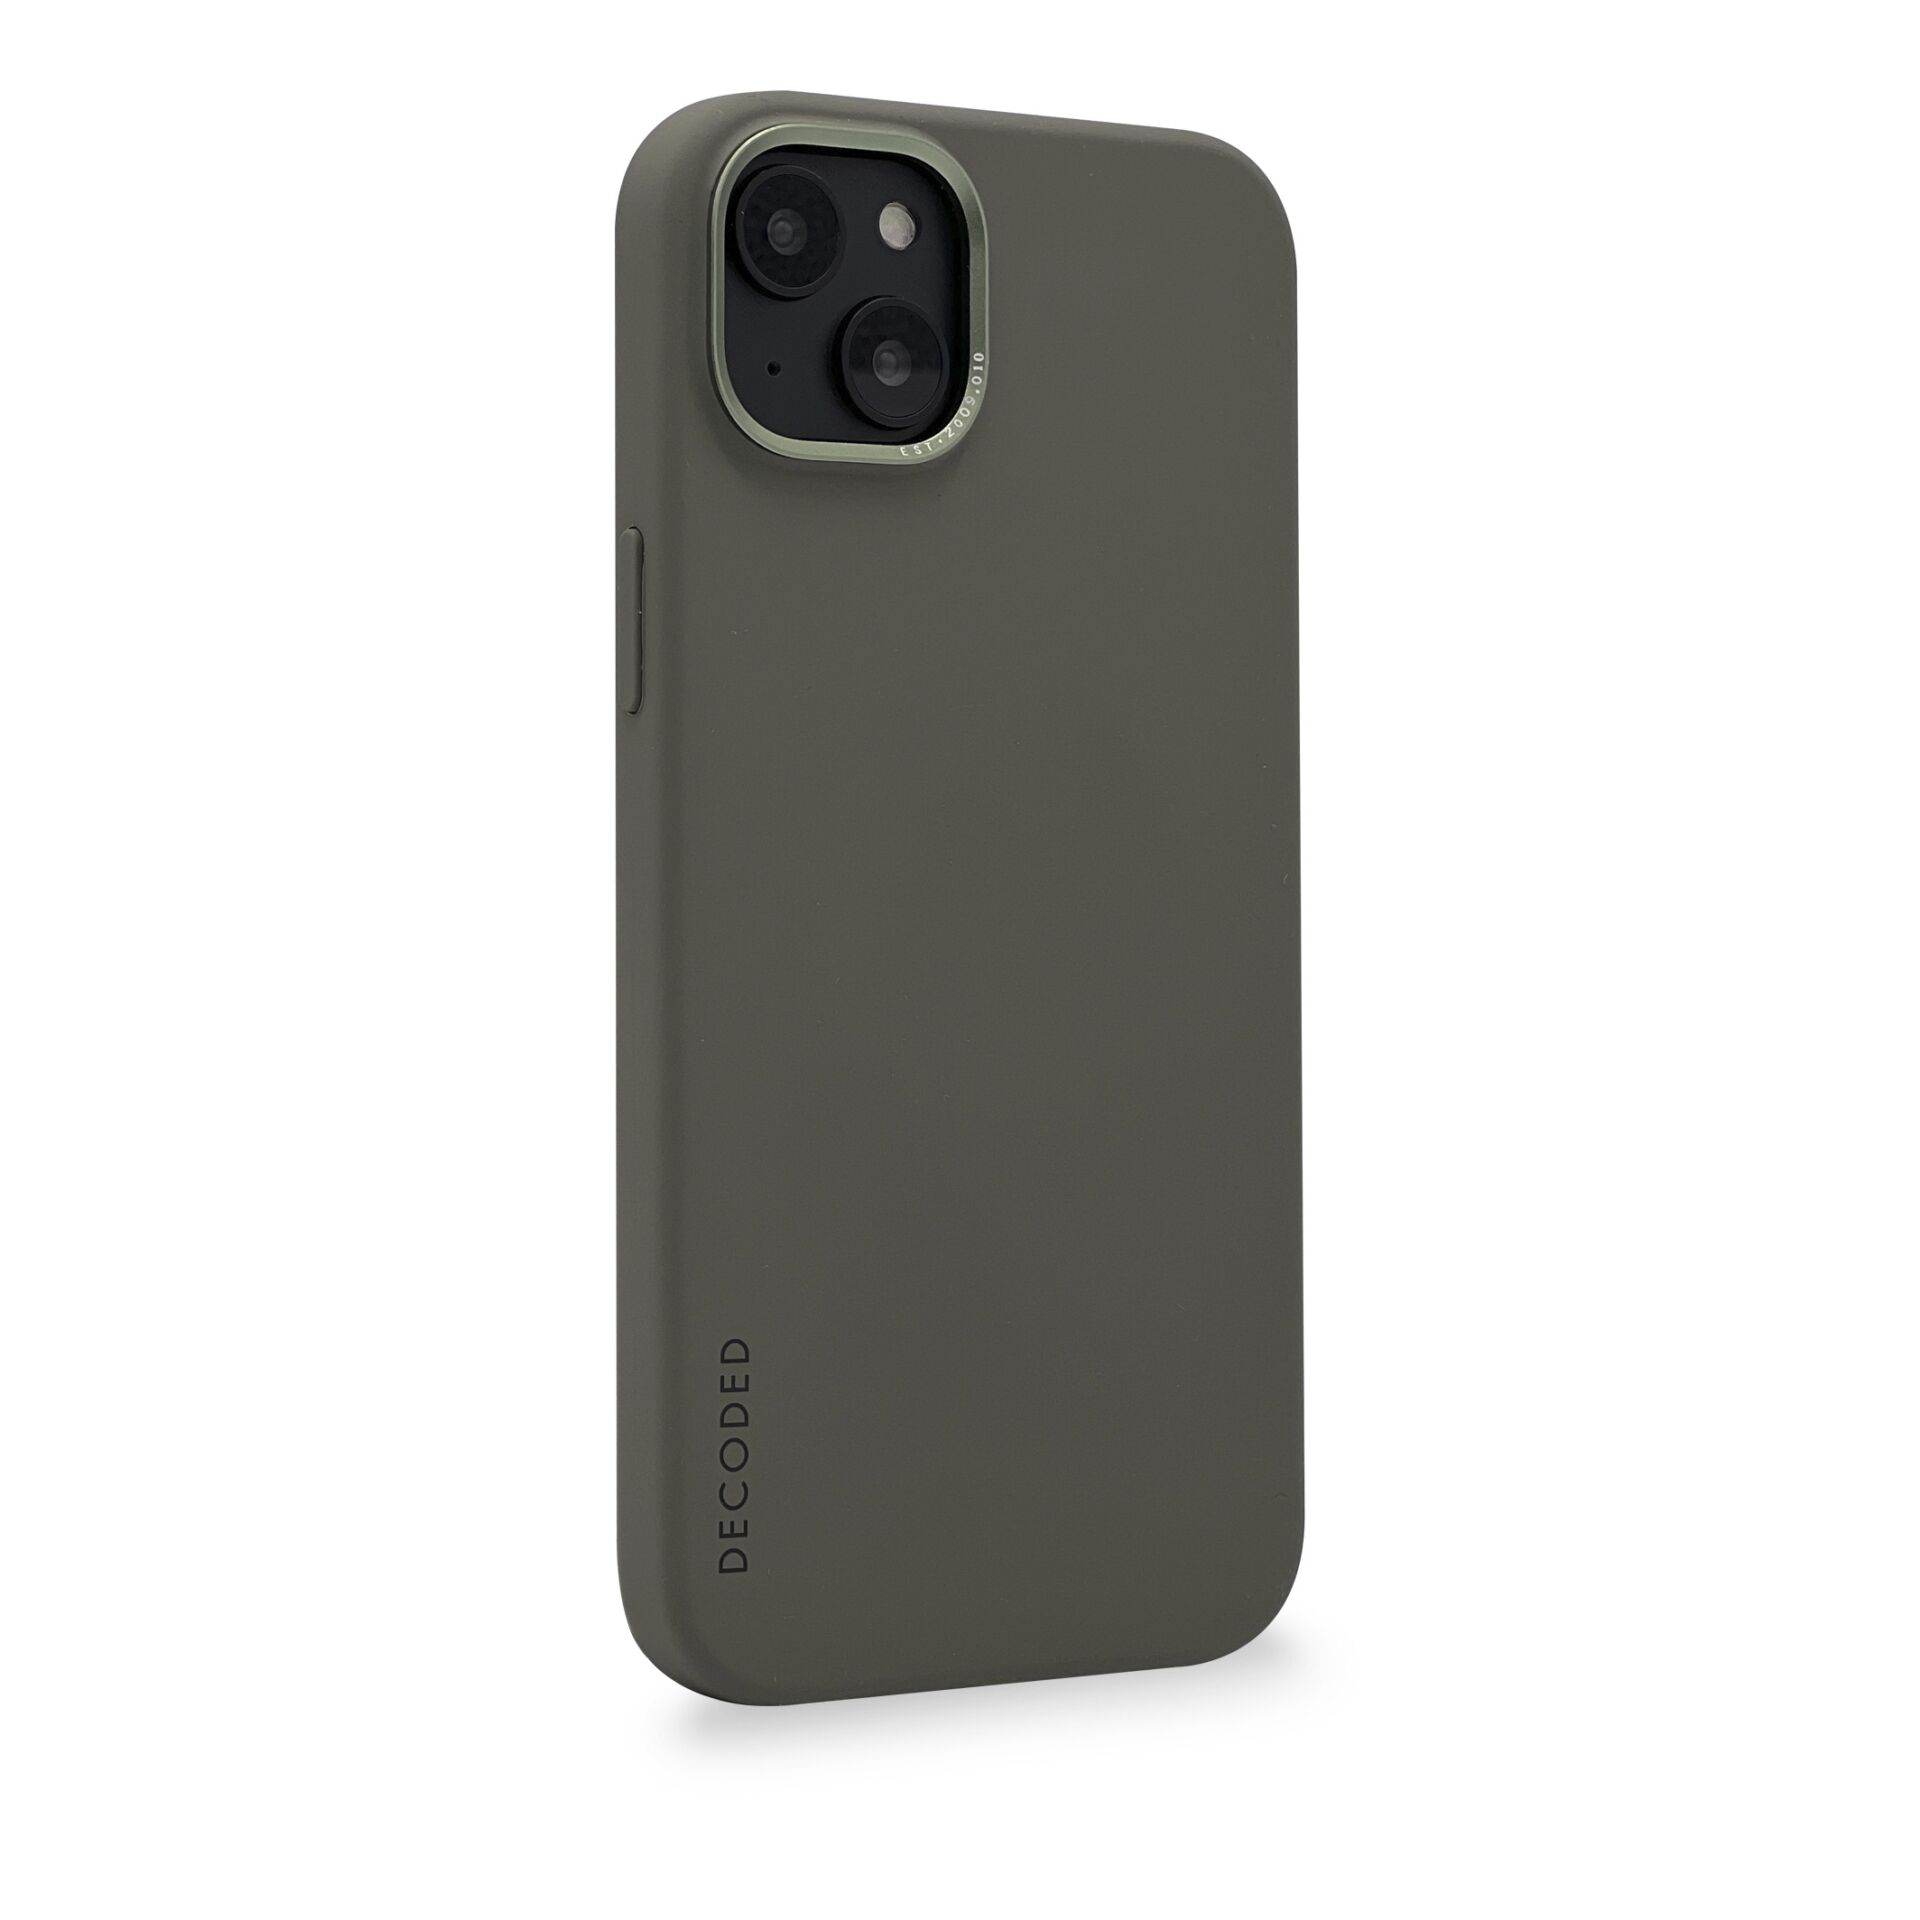 Apple, Backcover, Backcover Olive 14, DECODED Olive, AntiMicrobial iPhone Silicone